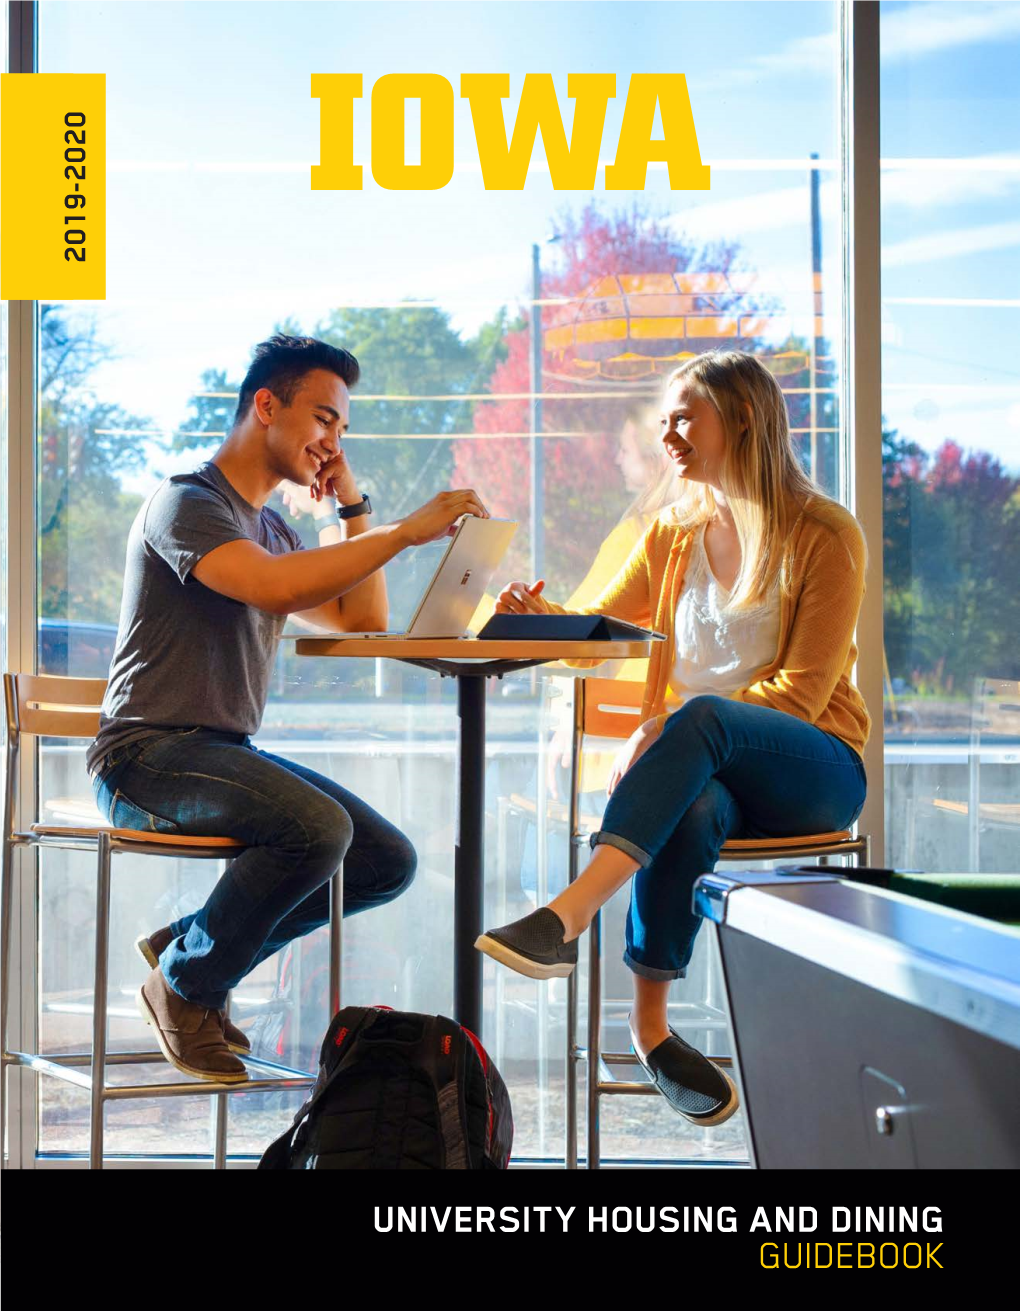 University Housing and Dining Guidebook